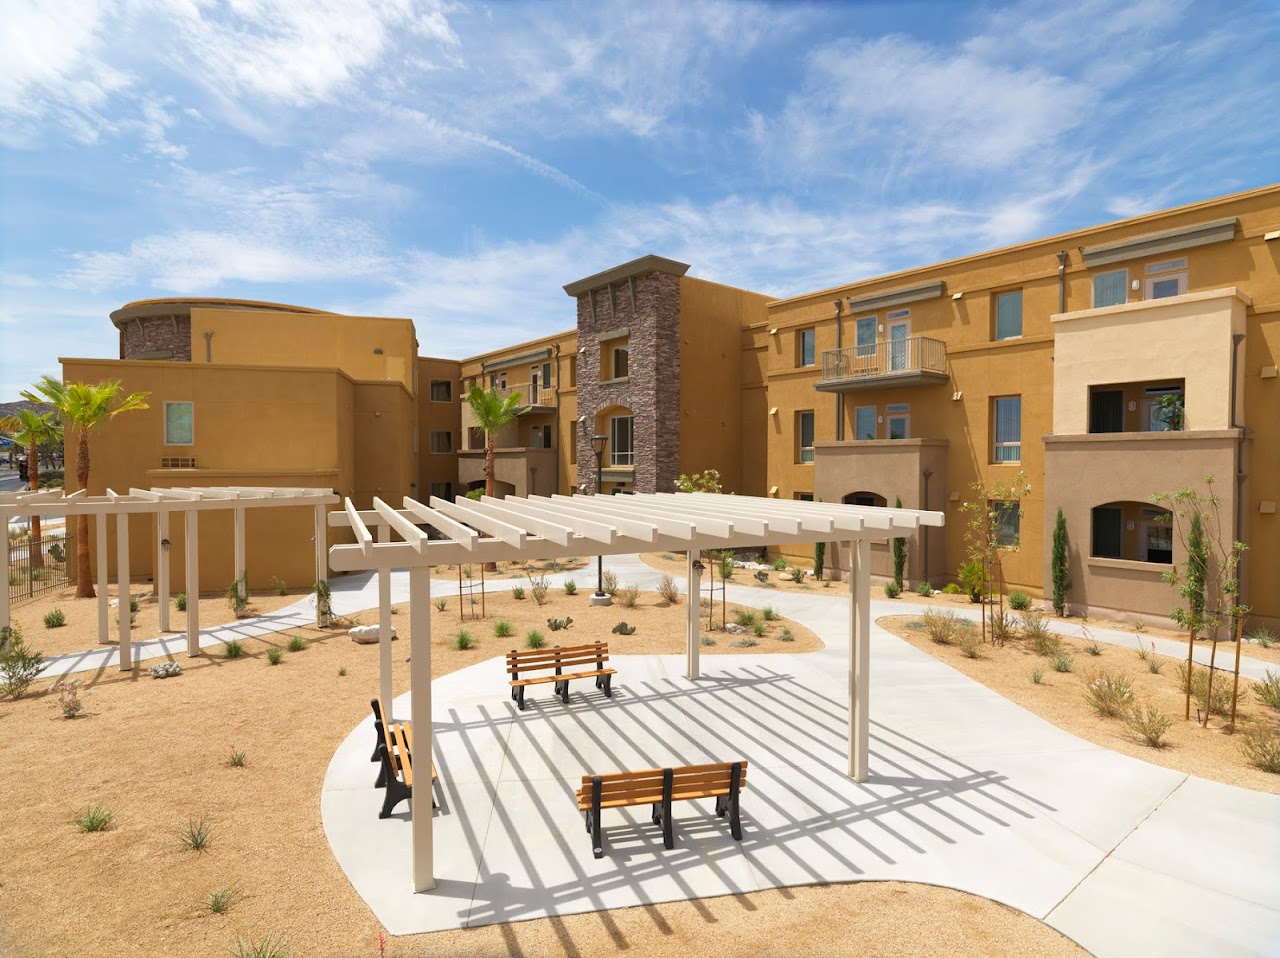 Photo of DUMOSA SENIOR VILLAGE. Affordable housing located at 57110 TWENTYNINE PALMS HIGHWAY YUCCA VALLEY, CA 92284